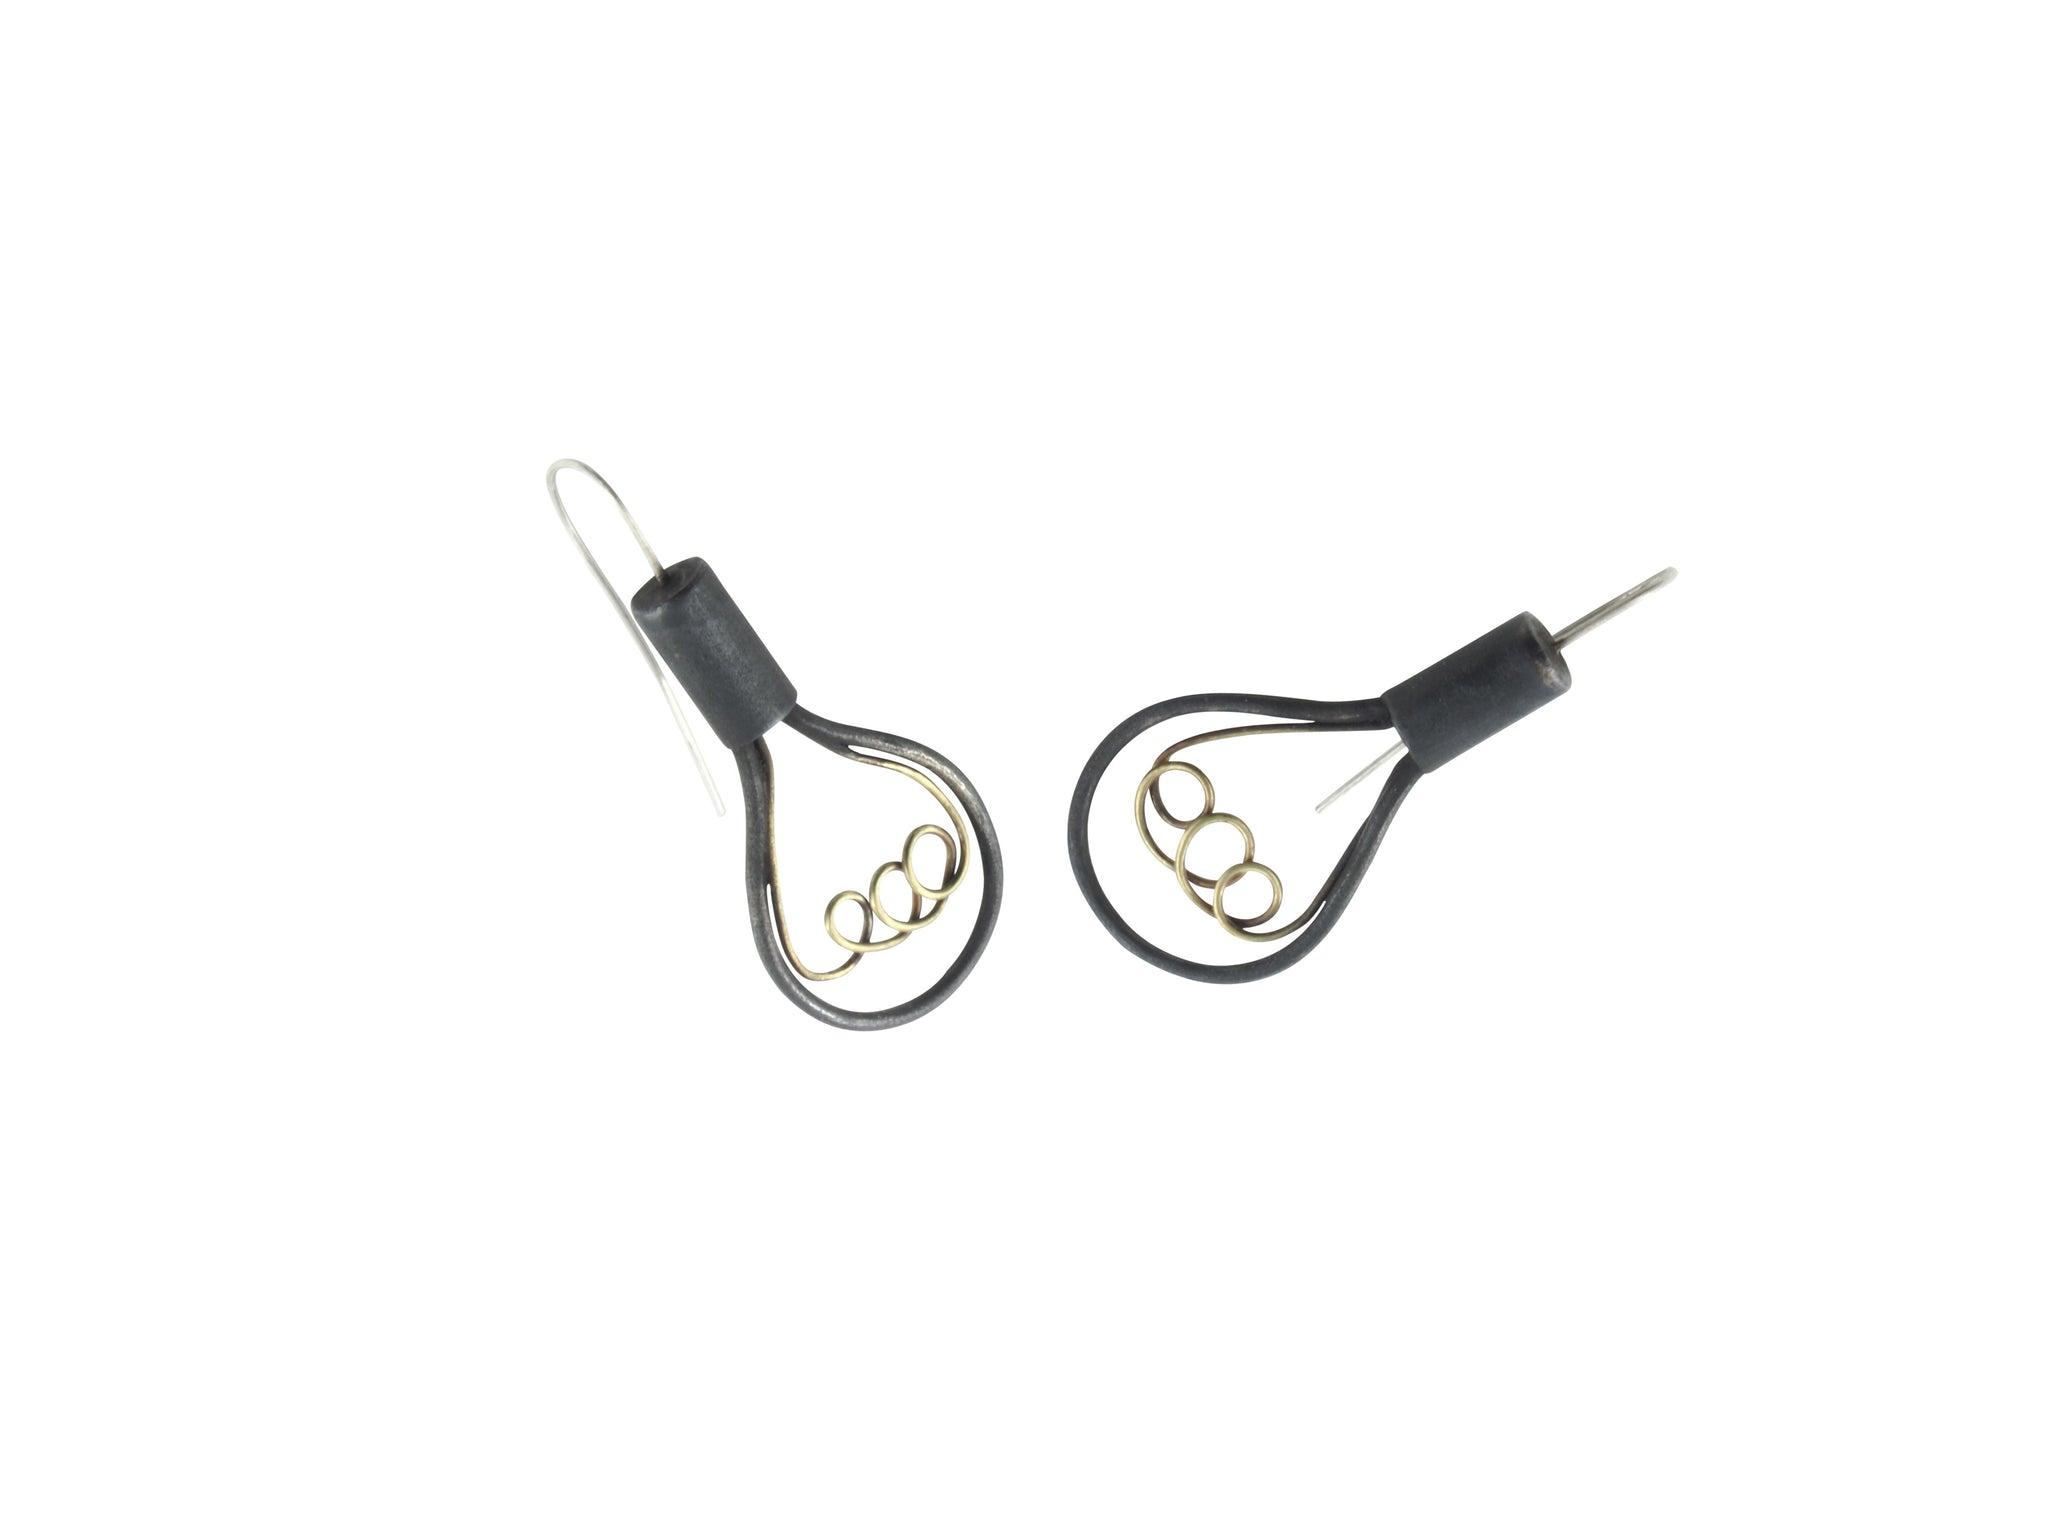 these earrings are based on vintage light bulb shapes and are made from sterling silver and brass